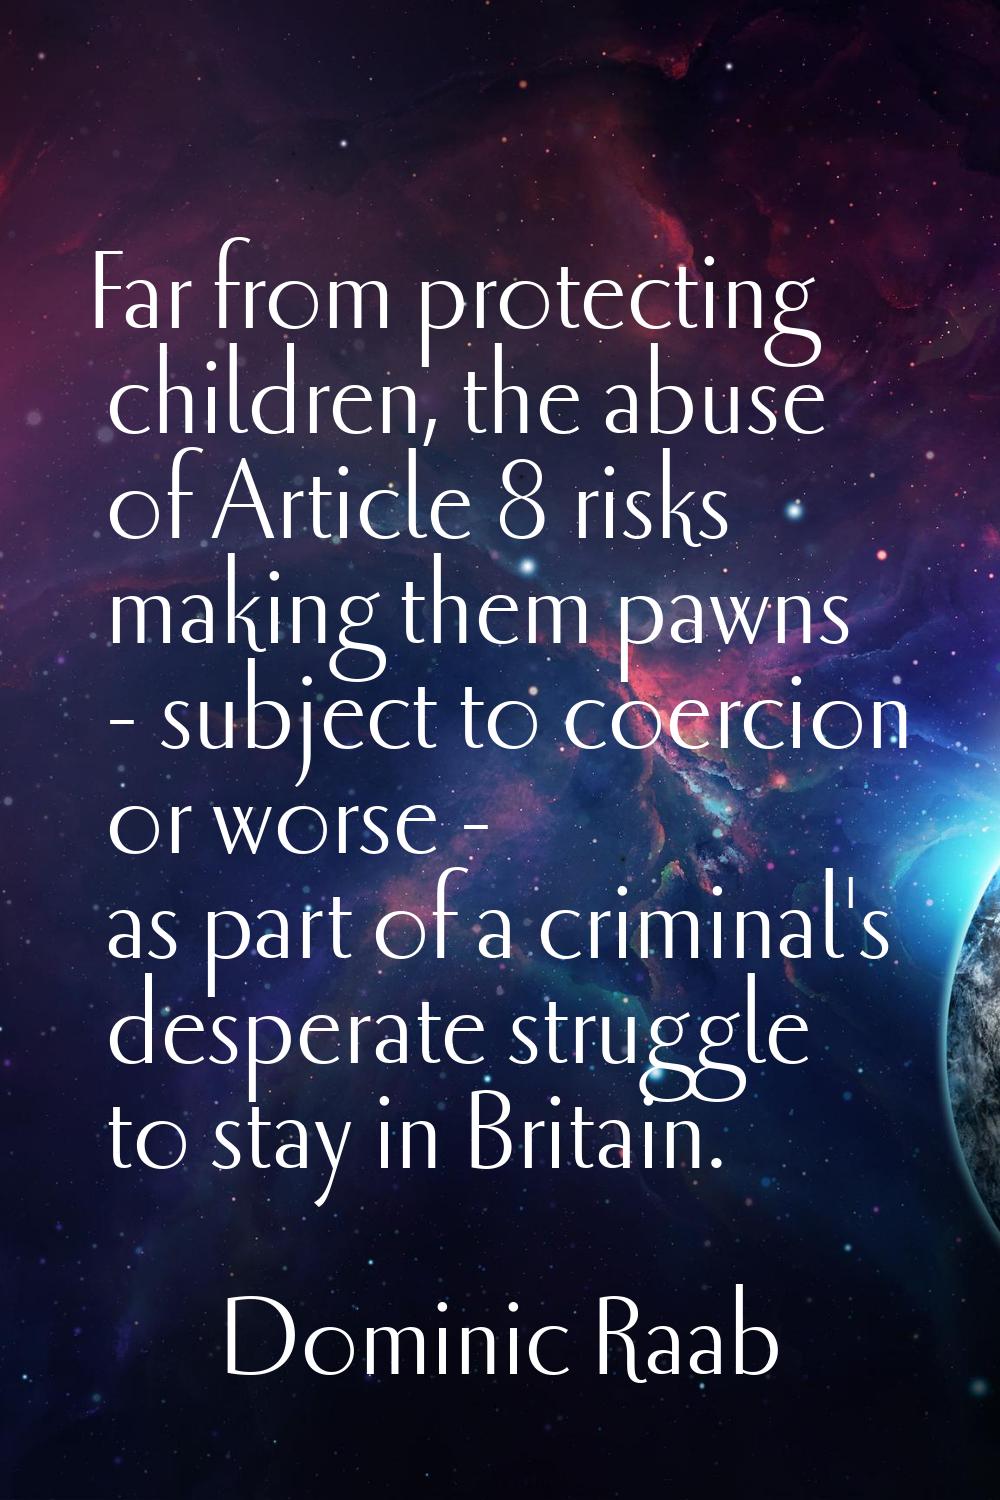 Far from protecting children, the abuse of Article 8 risks making them pawns - subject to coercion 